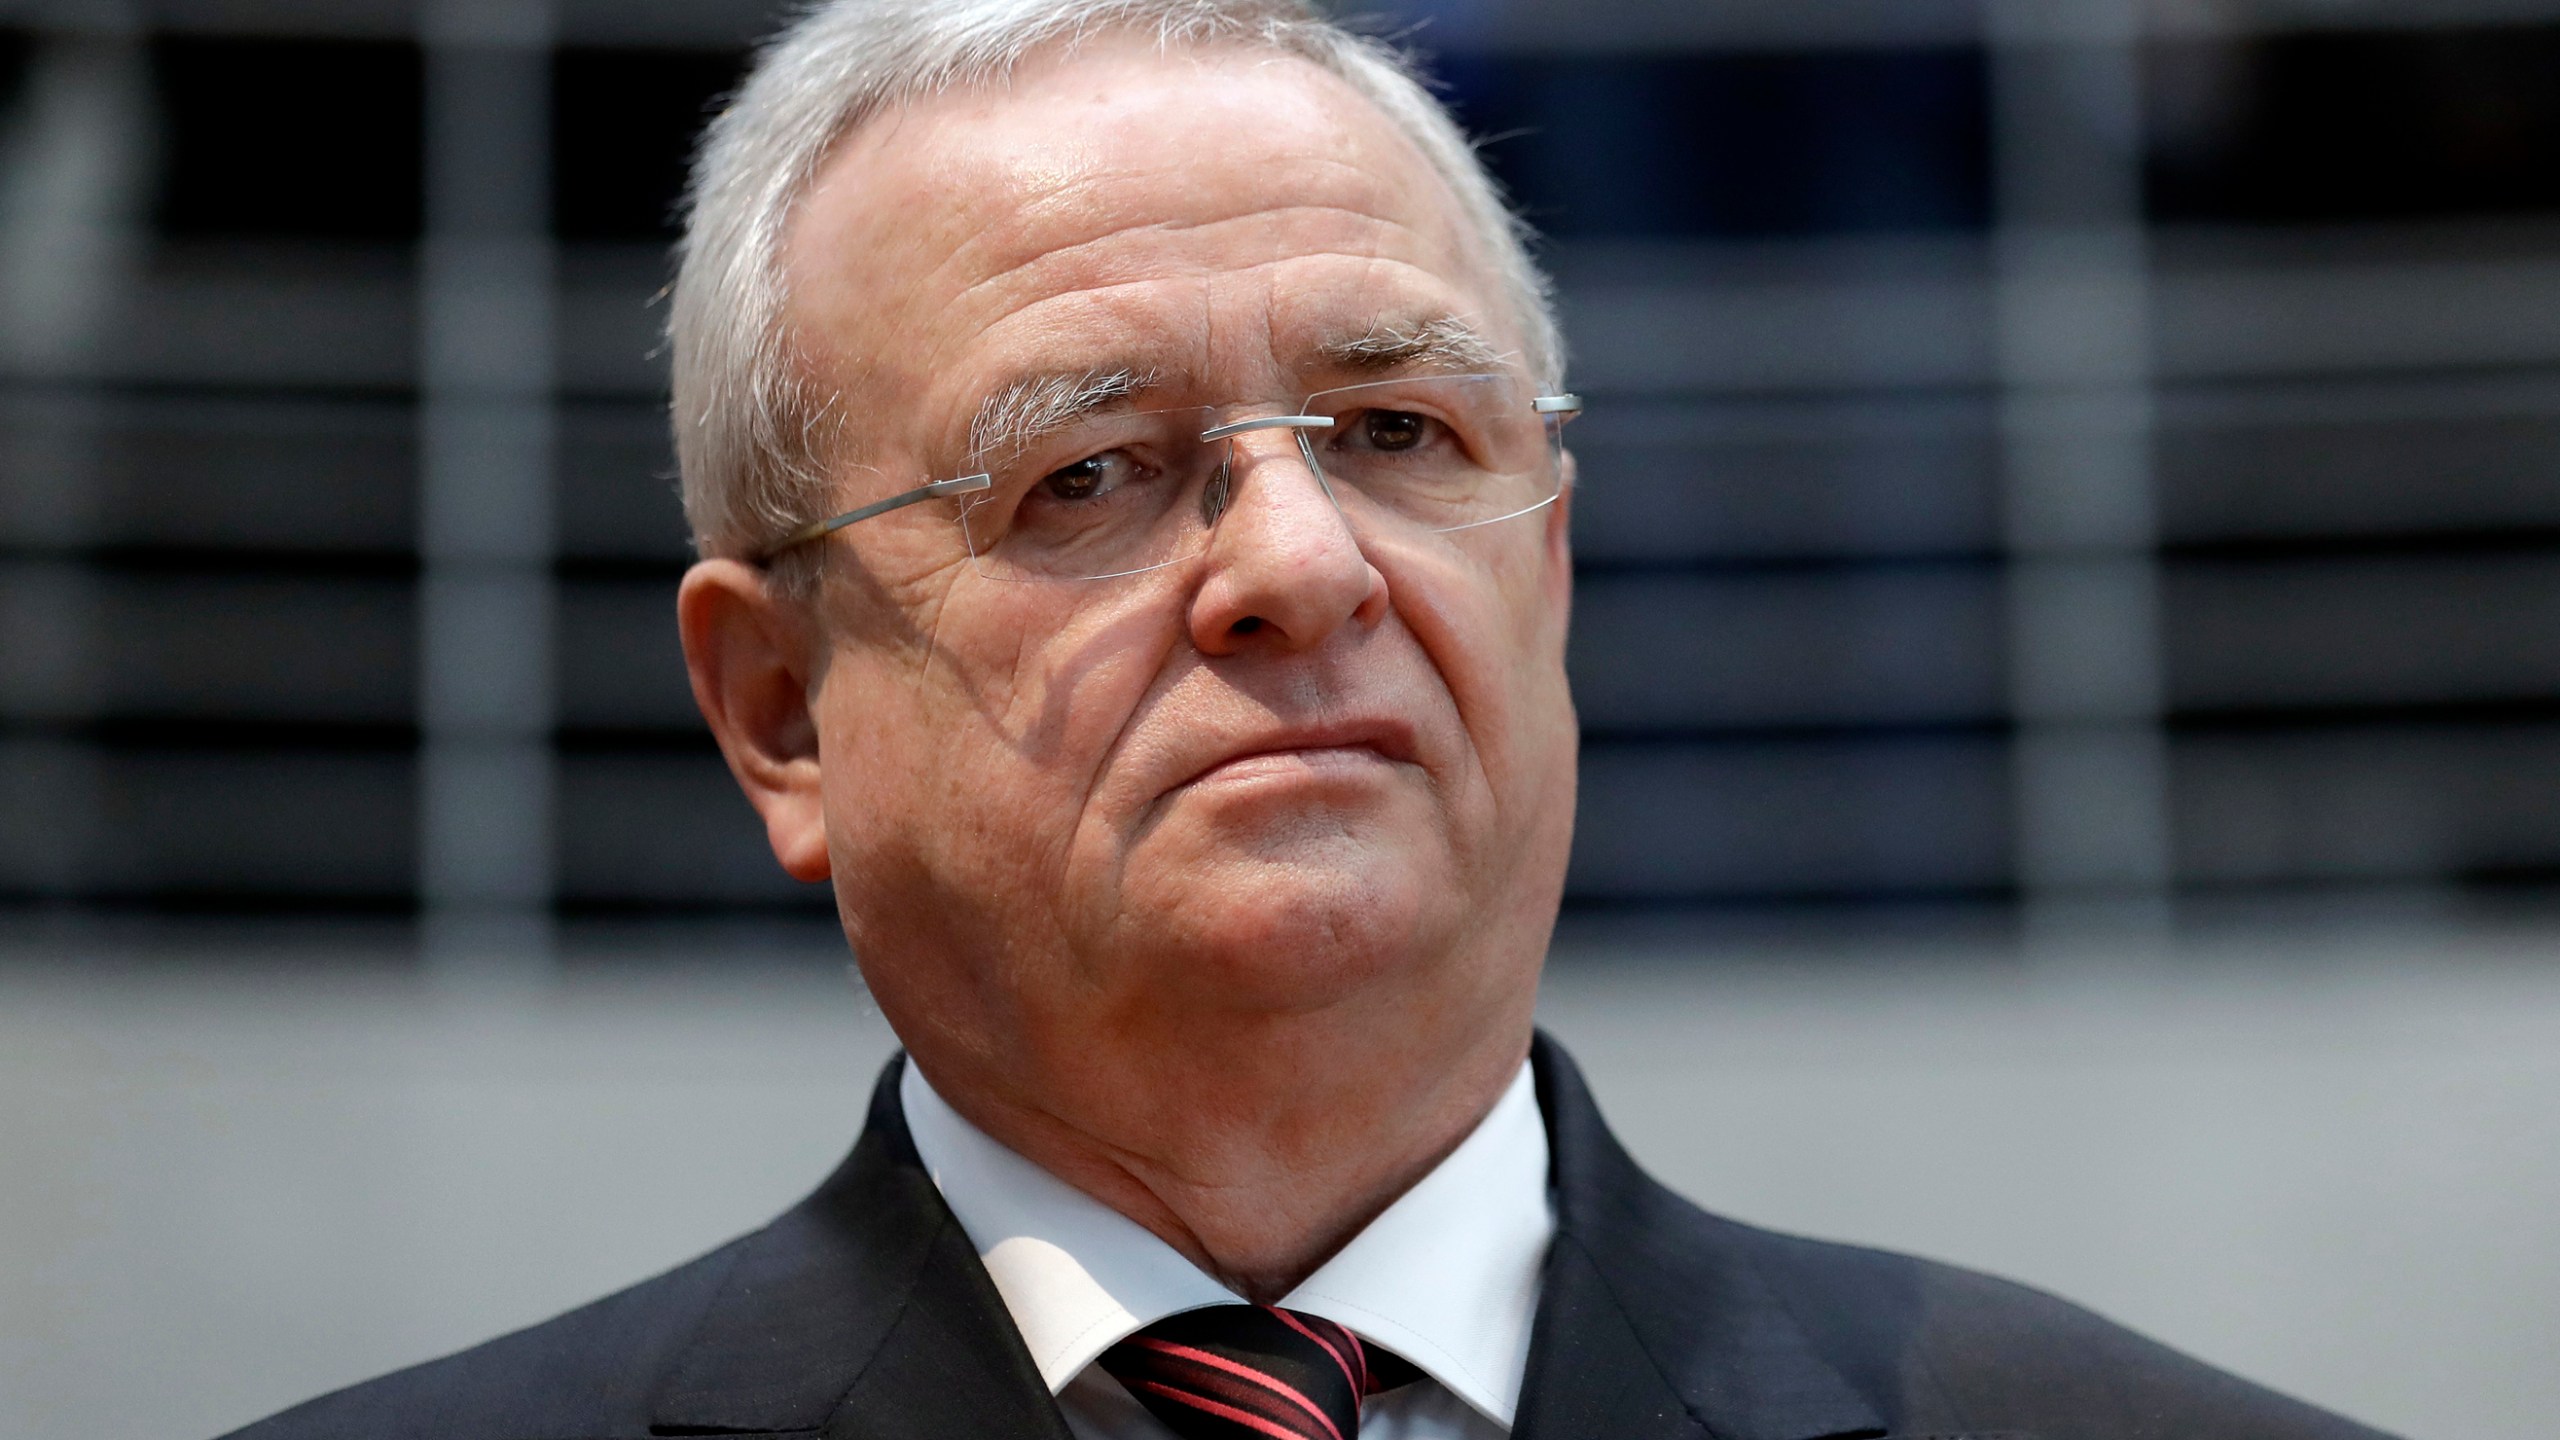 FILE - Martin Winterkorn, former CEO of the German car manufacturer 'Volkswagen', arrives for a questioning at an investigation committee of the German federal parliament in Berlin, Germany on Jan. 19, 2017. Former Volkswagen CEO Martin Winterkorn is set to go on trial in September on charges of fraud and market manipulation linked to the automaker's diesel emissions scandal, a German court said Friday, March 14, 2024. (AP Photo/Michael Sohn, File)